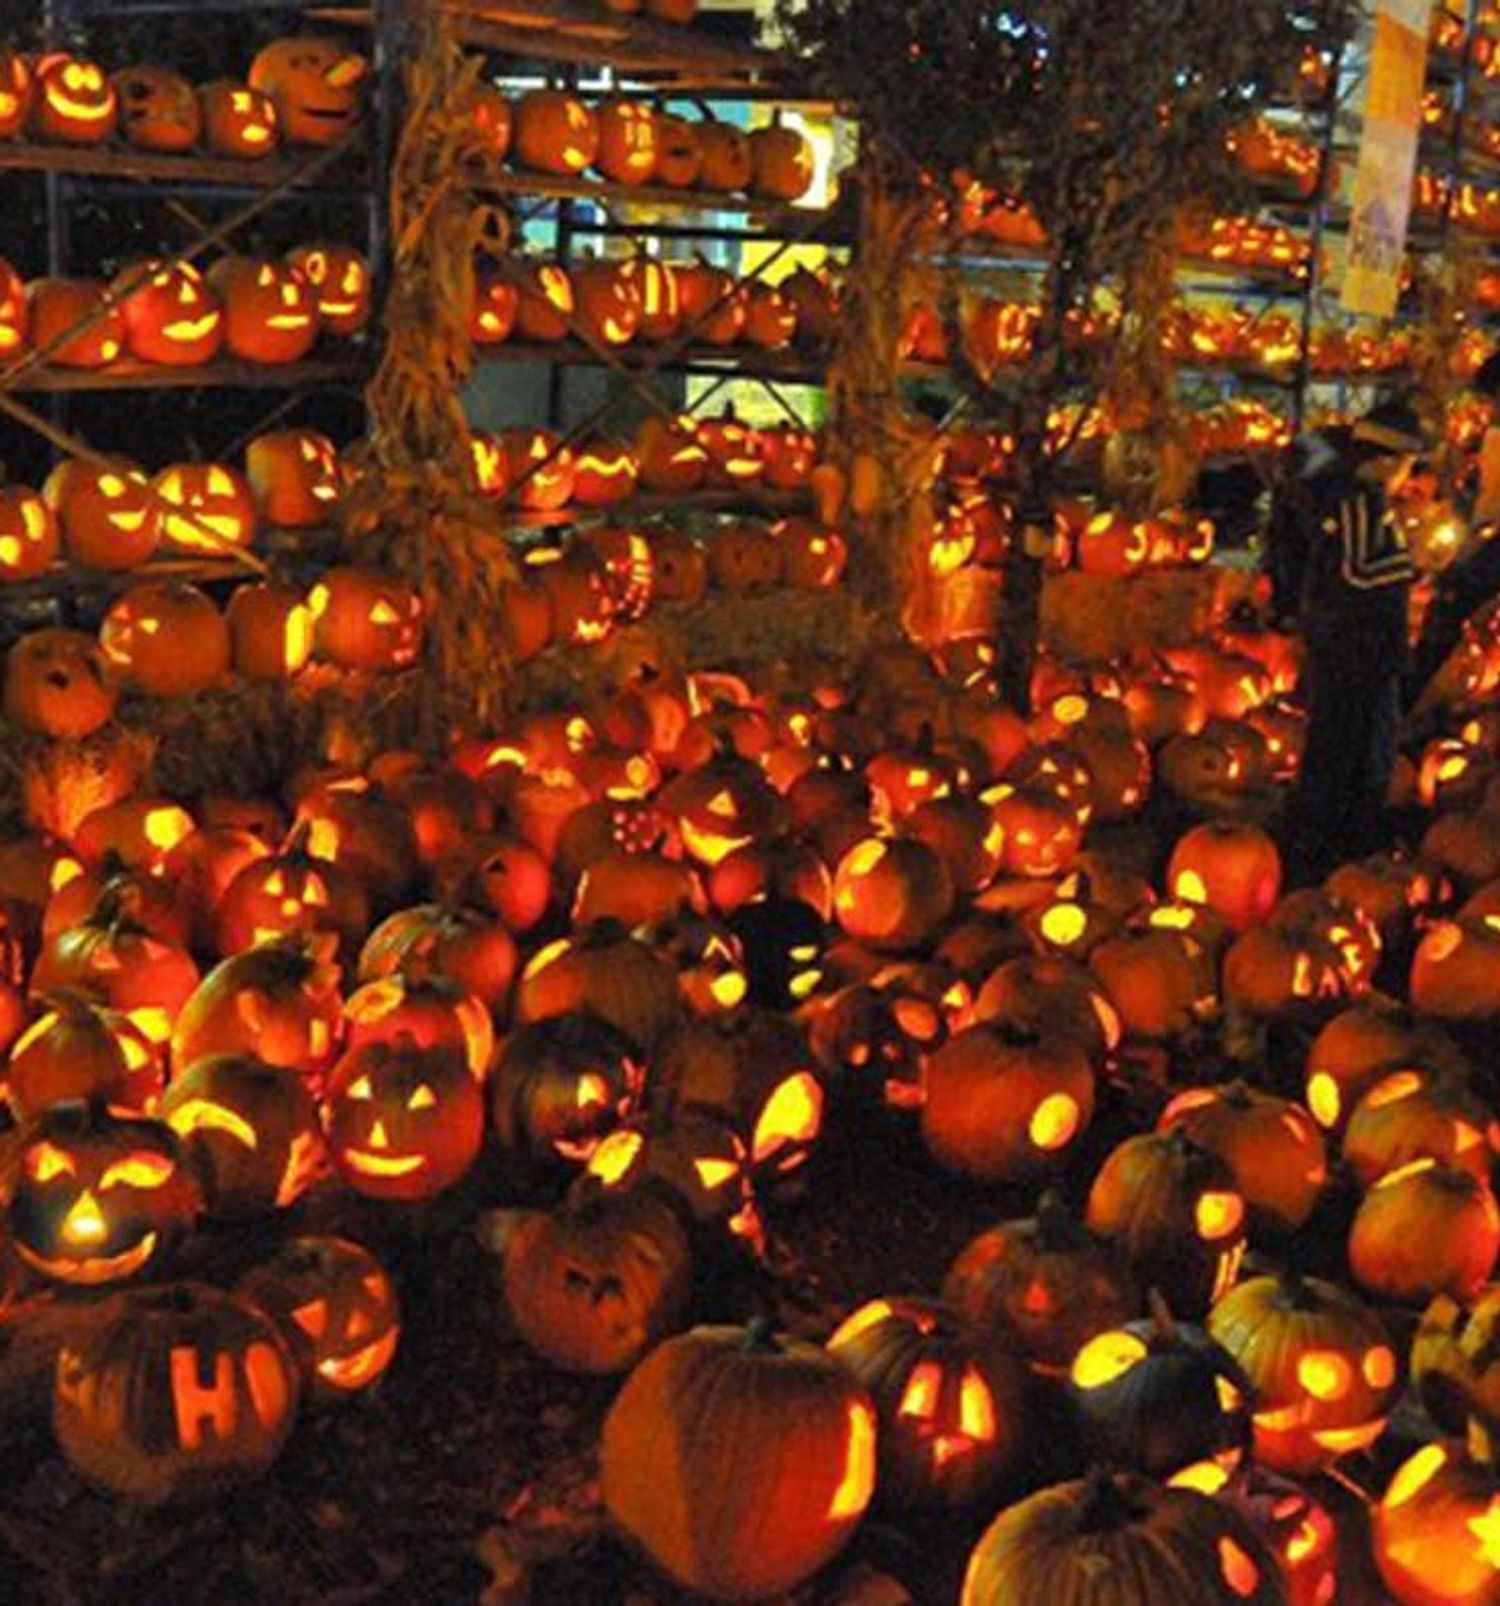 10 Jacko’Lantern Festivals You Have to See to Believe